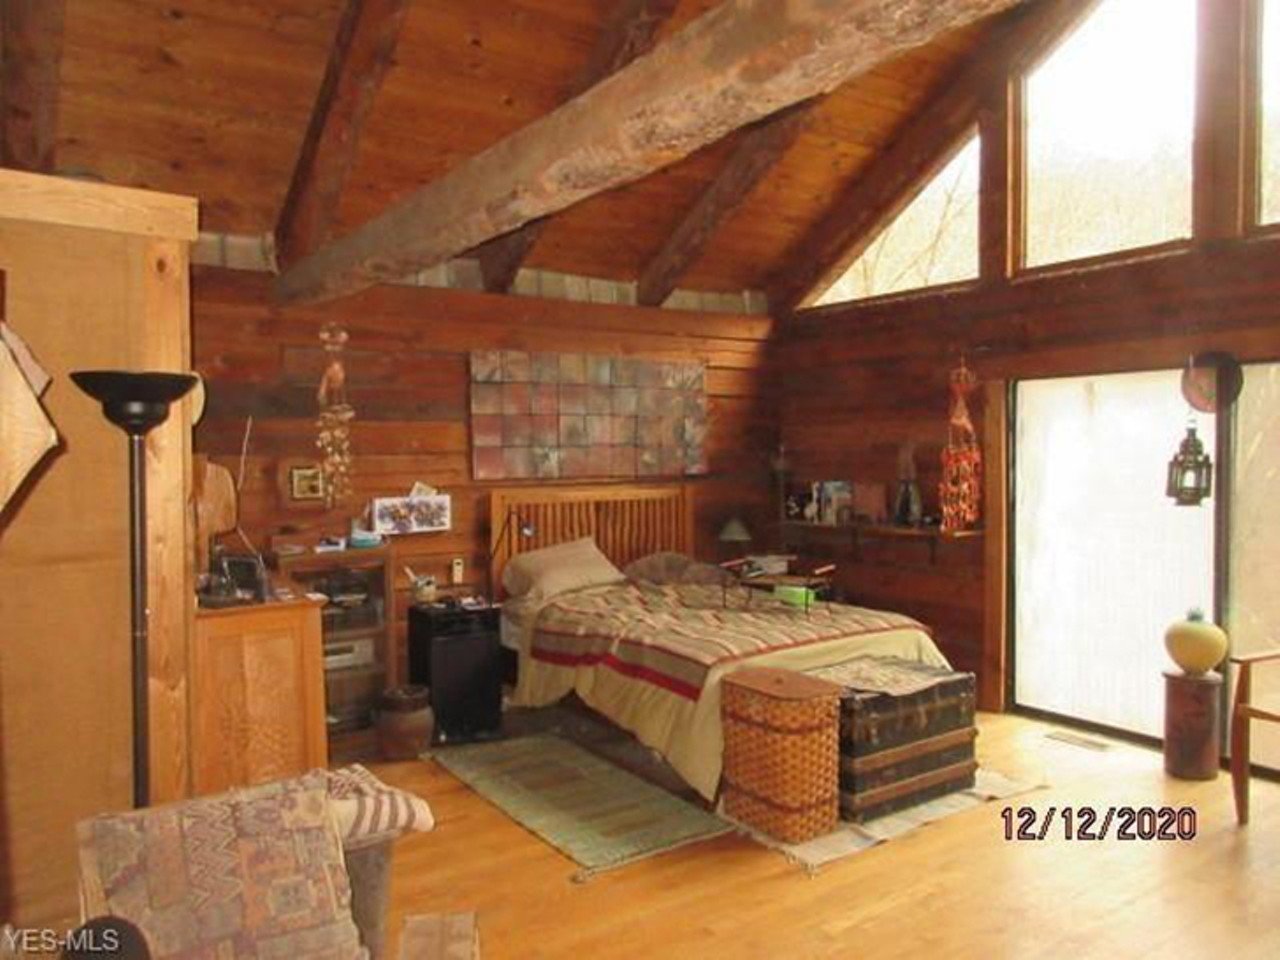 Ohio Log Cabin Where Baseball Legend Cy Young Was Born Is For Sale